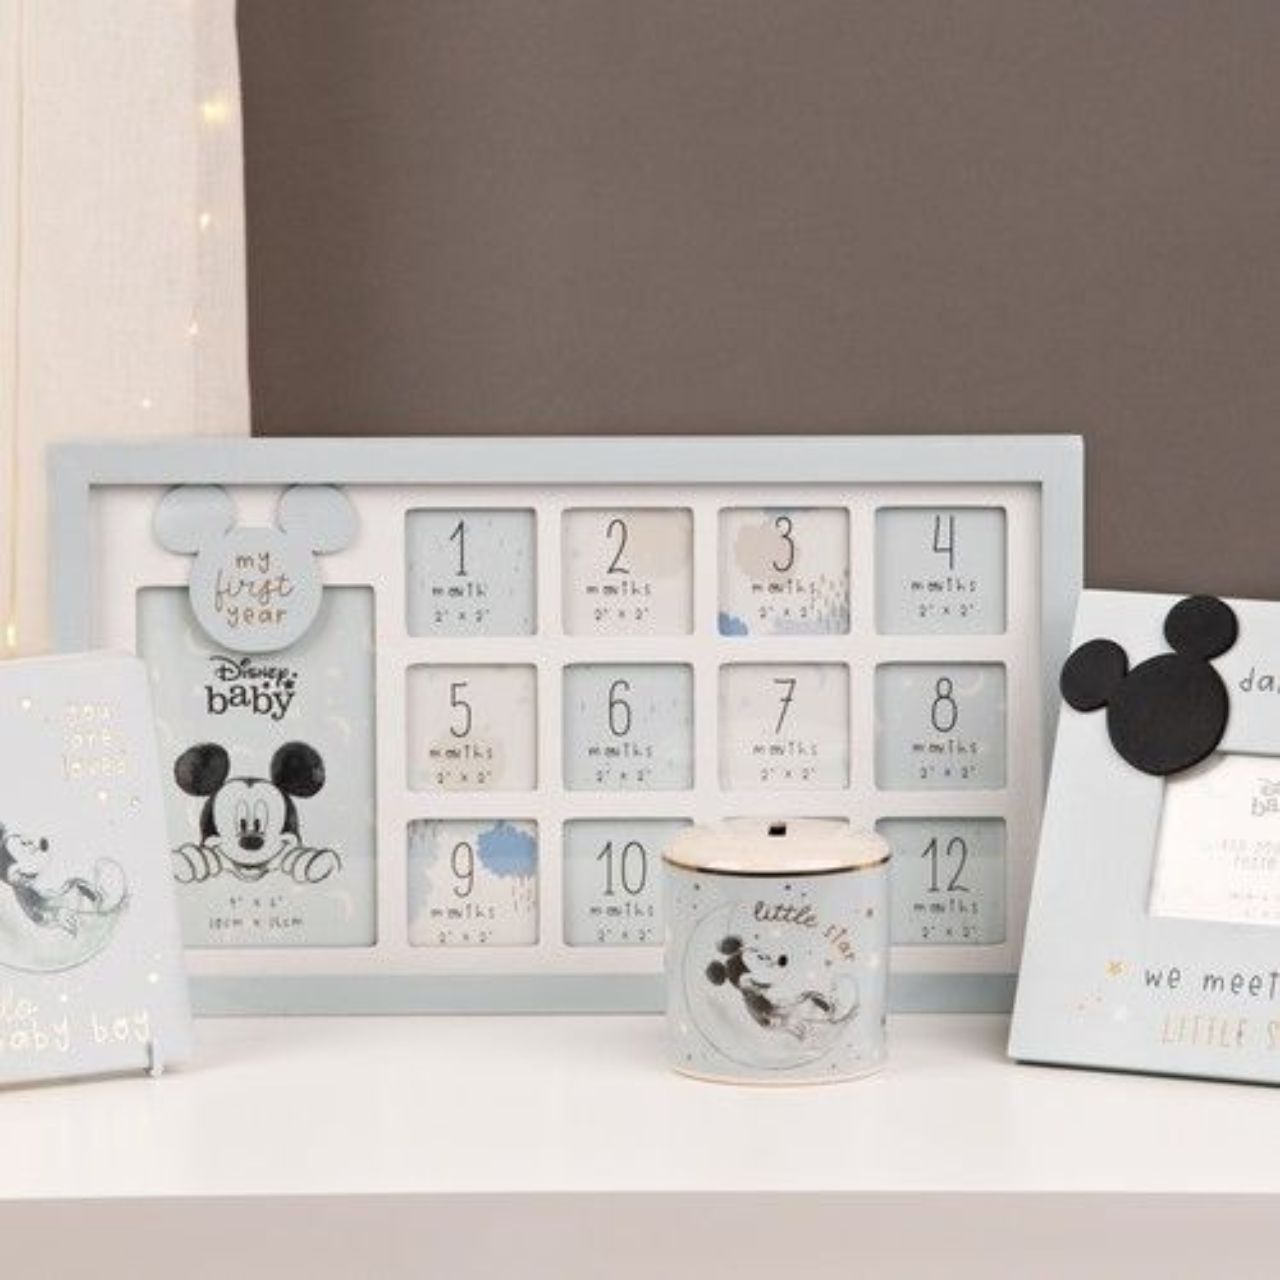 This precious Mickey Mouse money bank is the perfect gift for a sweet bundle of joy.  Complete with gold foil details and a 'little star' senitment, this makes a stunning addition to a nursery.